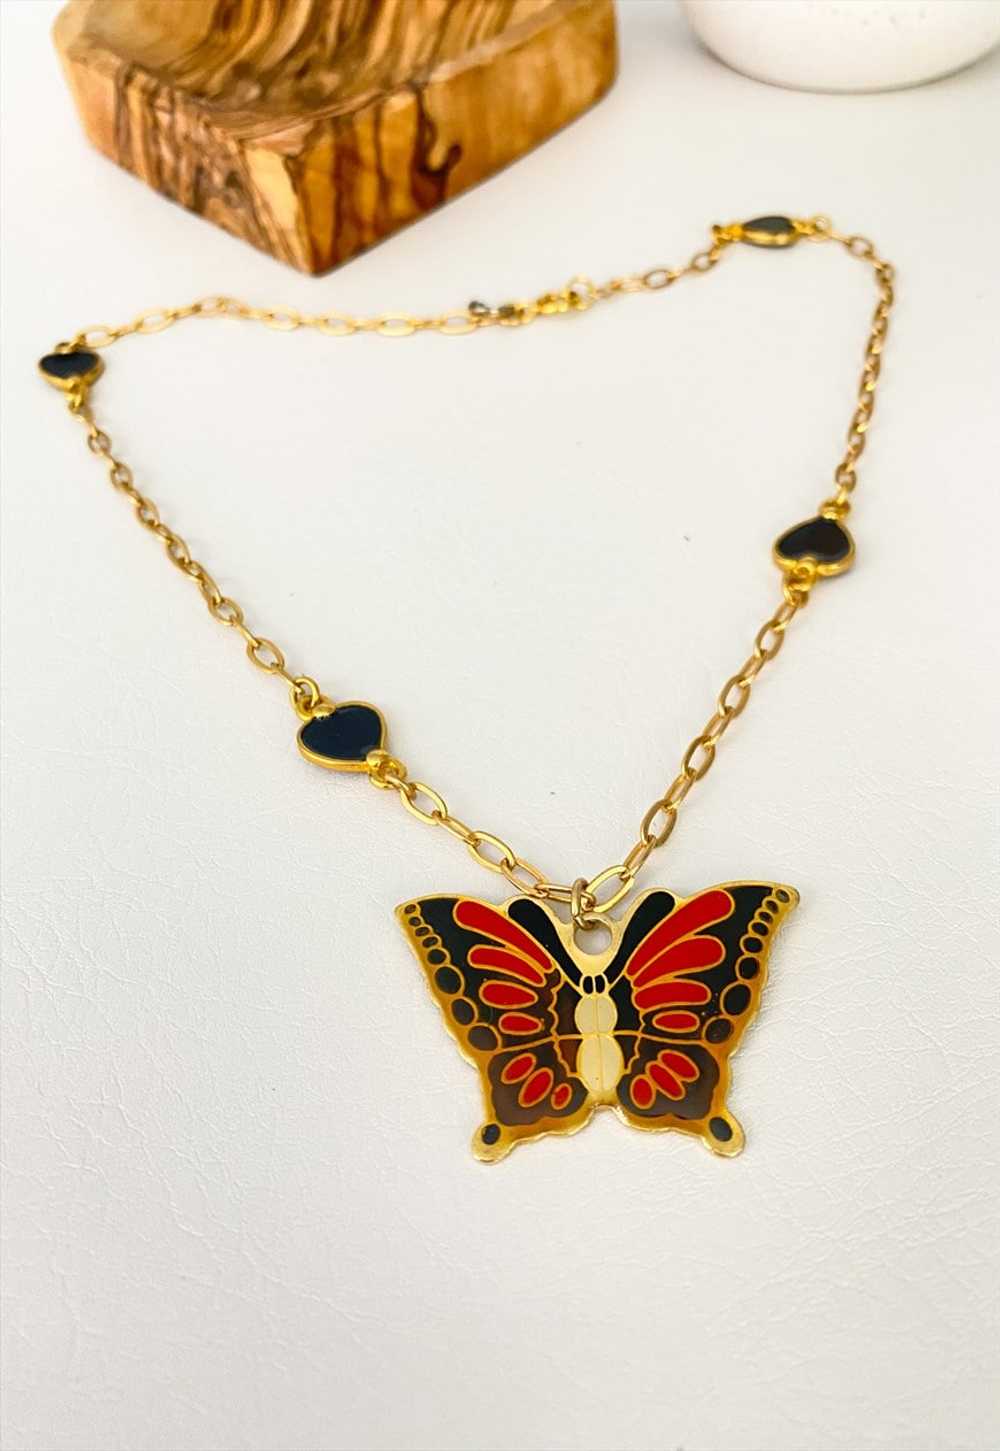 Boho Rose 1980's Heart Chain Butterfly Necklace - image 2